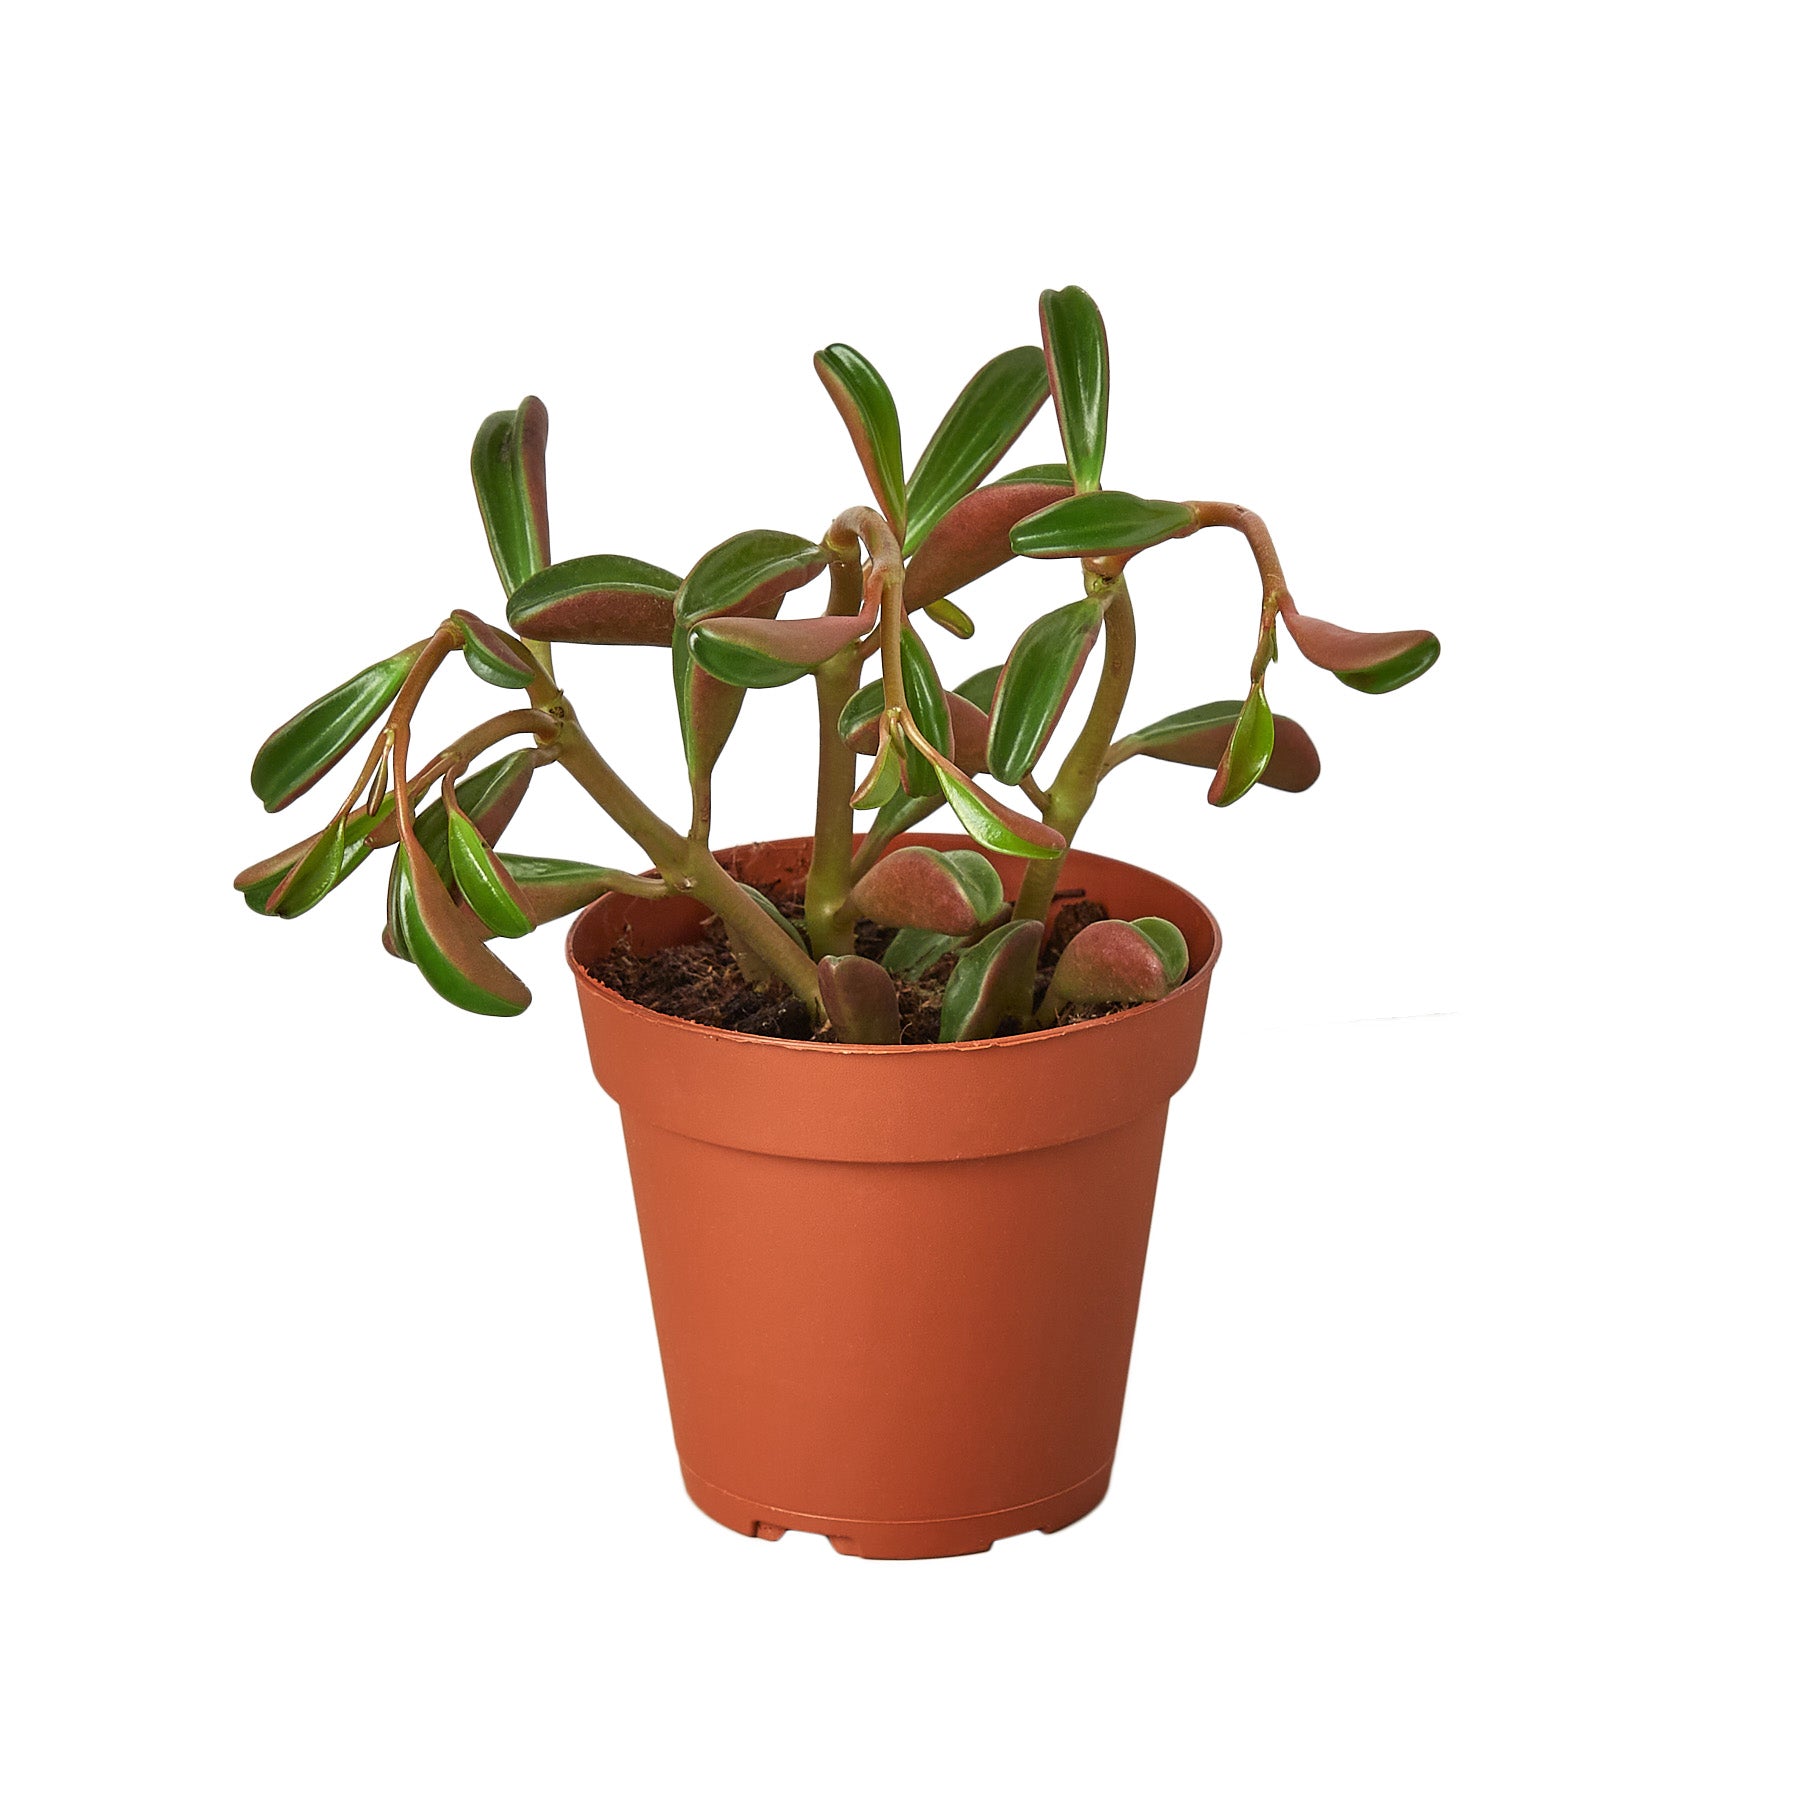 A small plant in a pot on a white background, perfect for your nearest garden center.